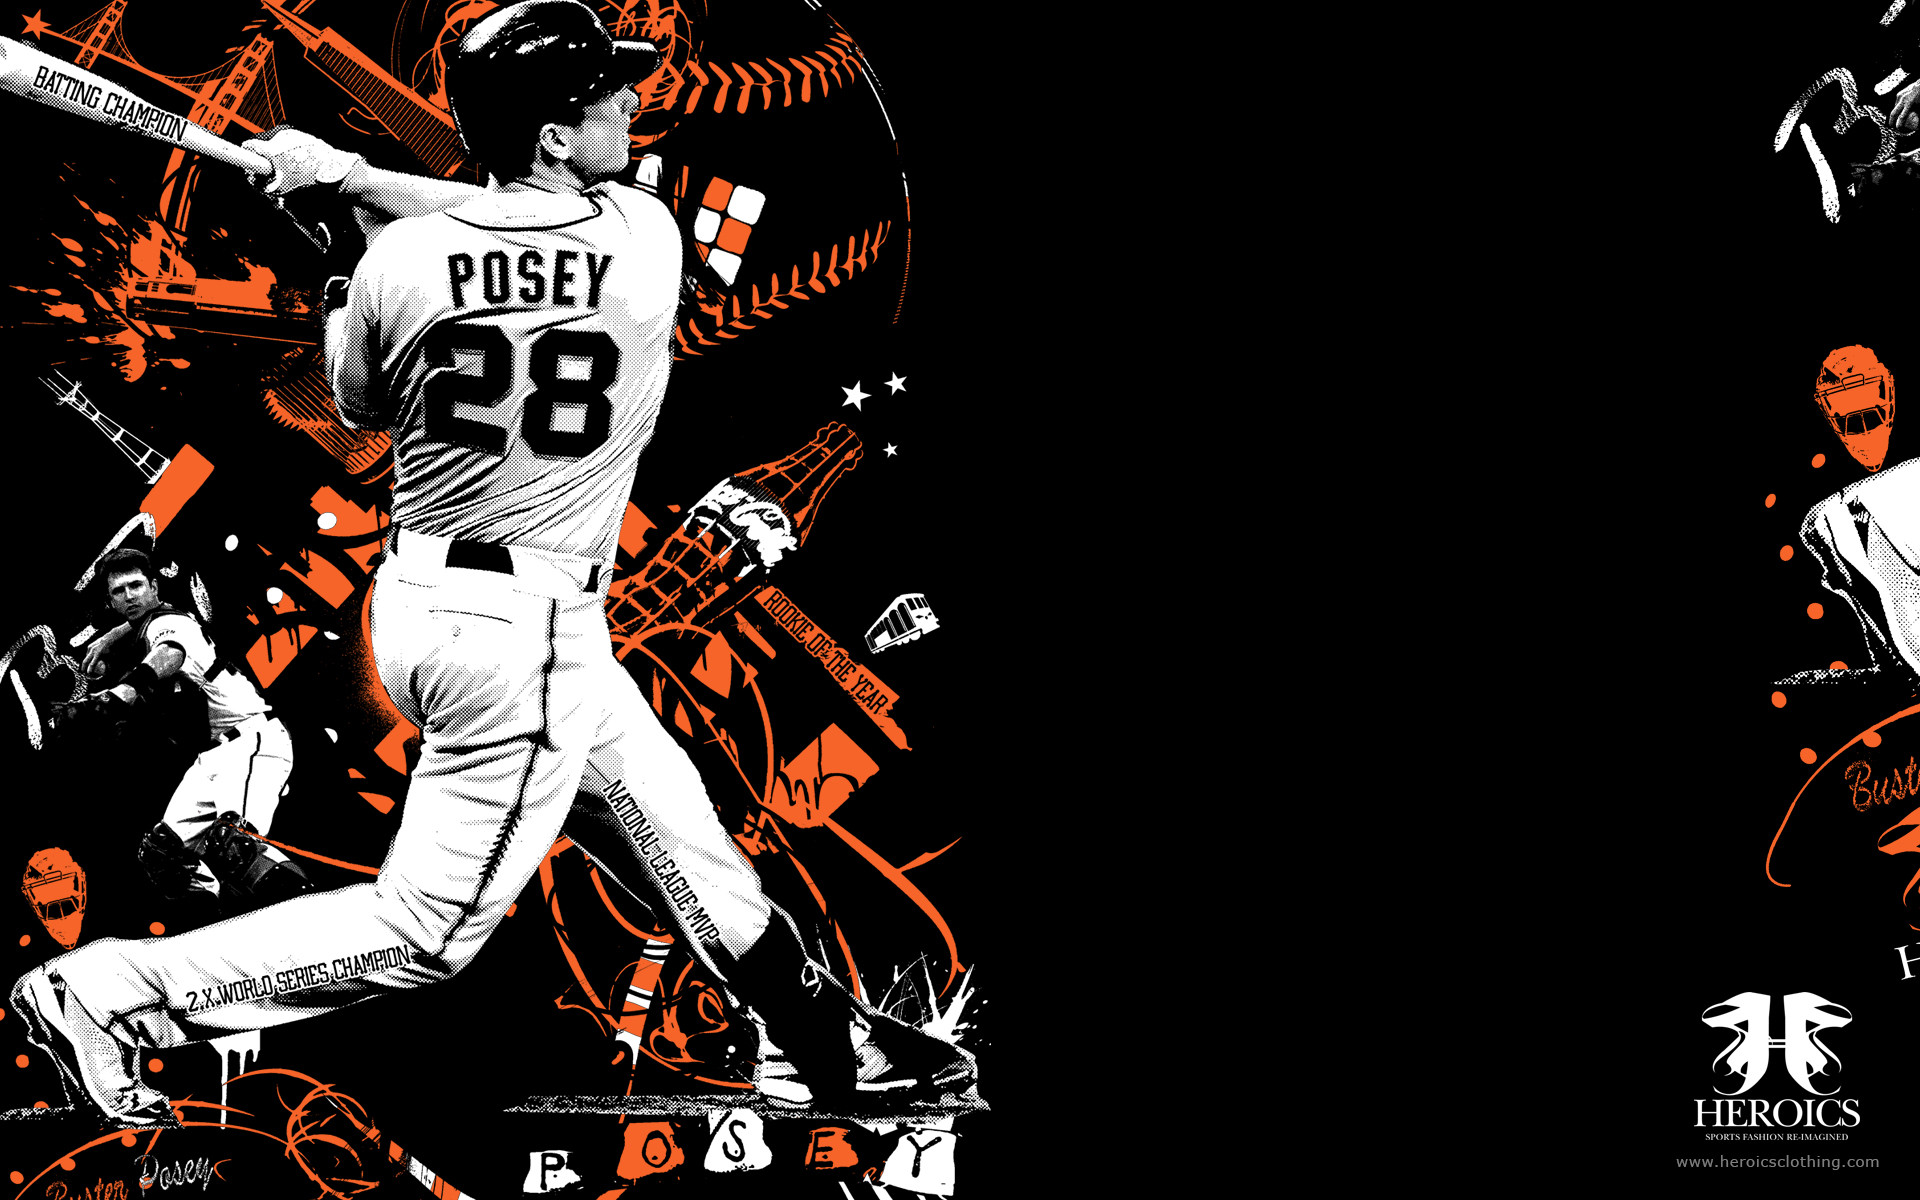 Image Buster Posey